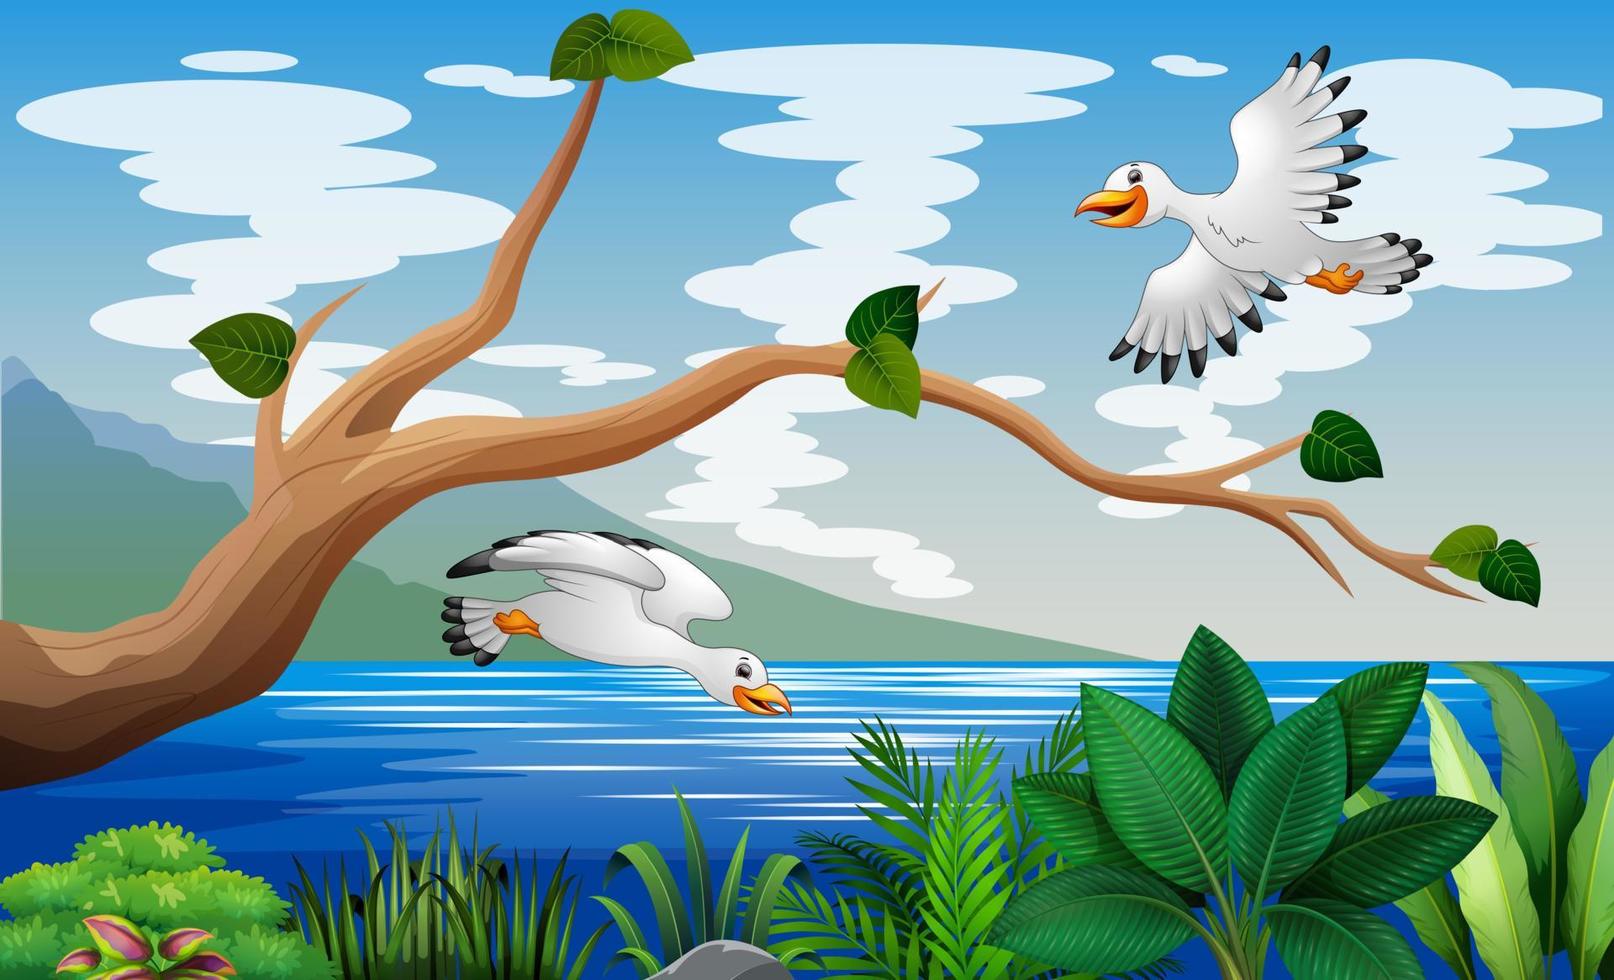 Two seagulls flying over a lake or sea illustration vector